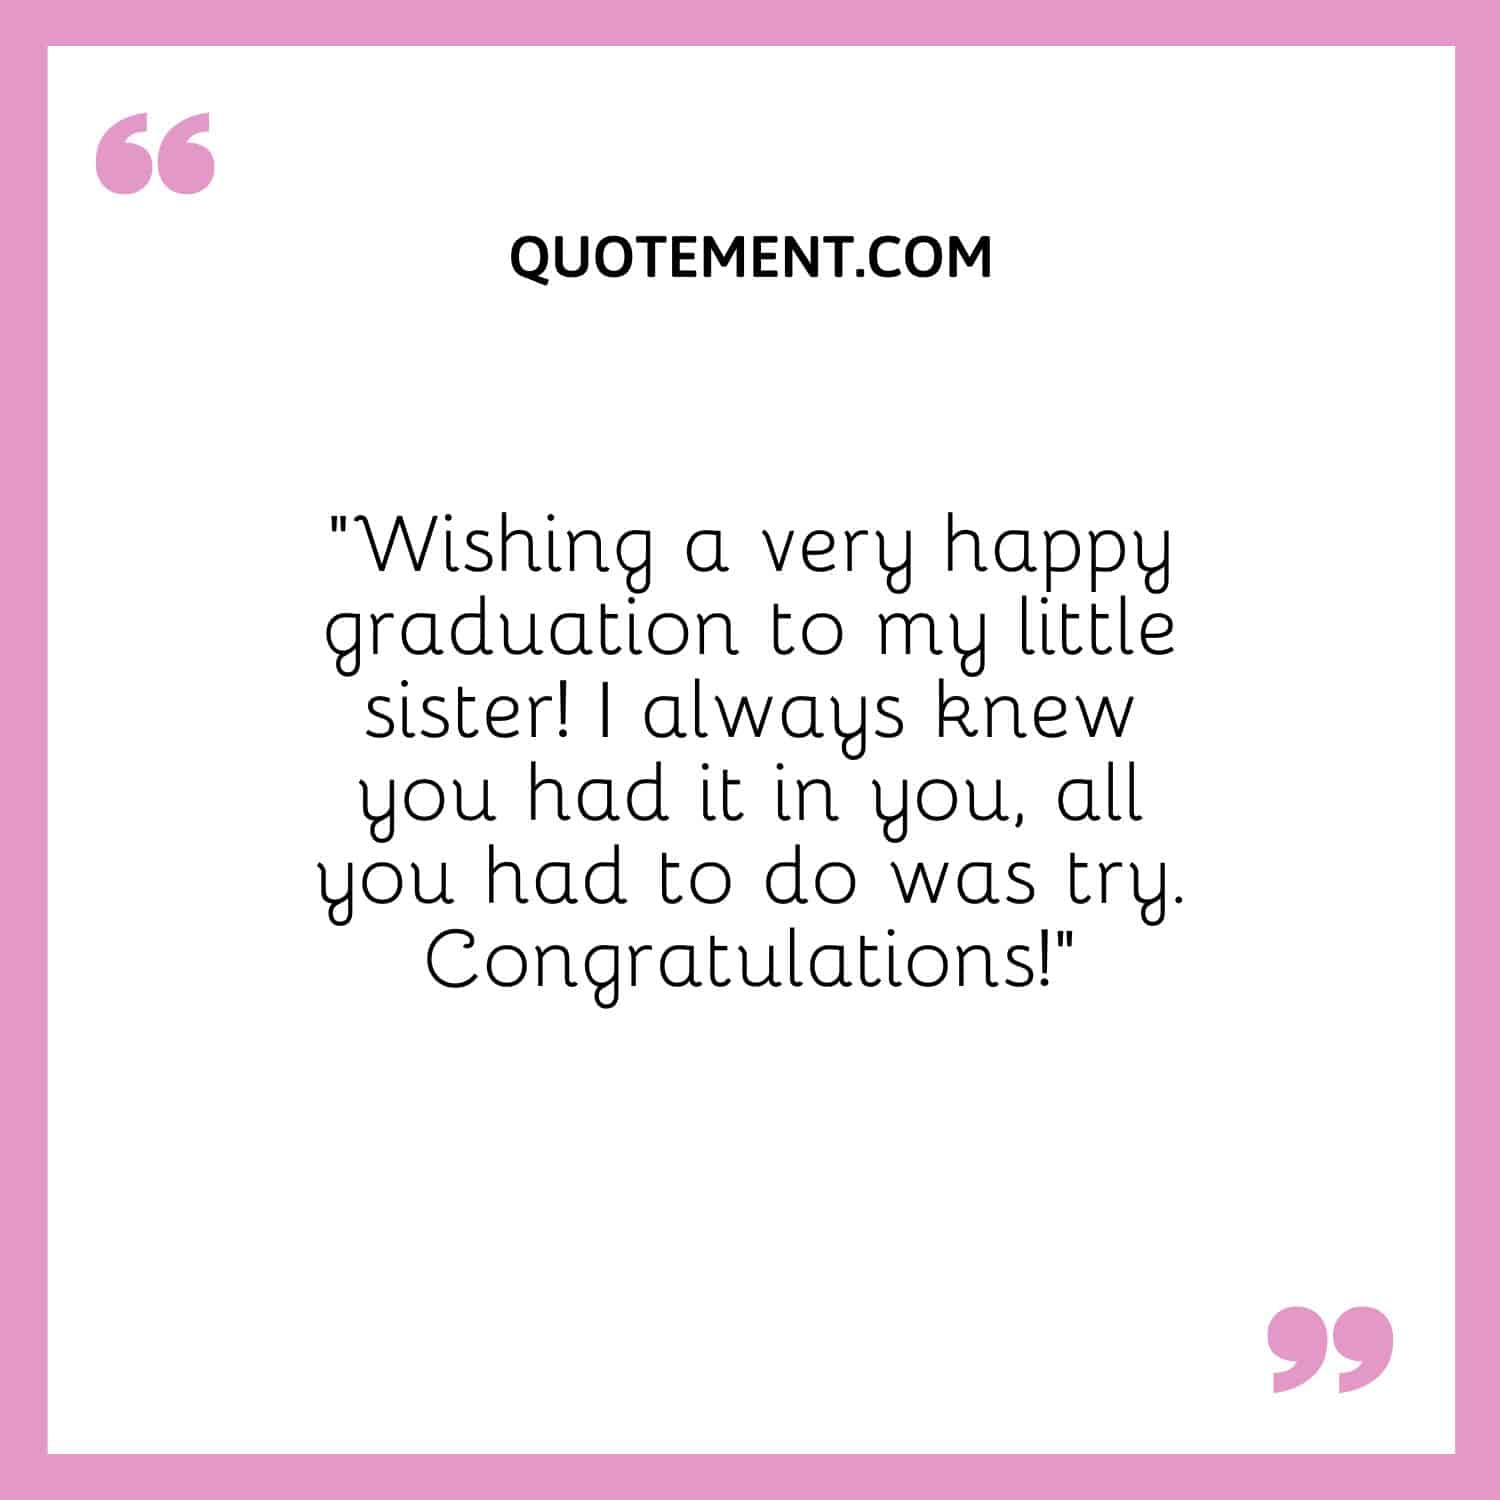 “Wishing a very happy graduation to my little sister! I always knew you had it in you, all you had to do was try. Congratulations!”